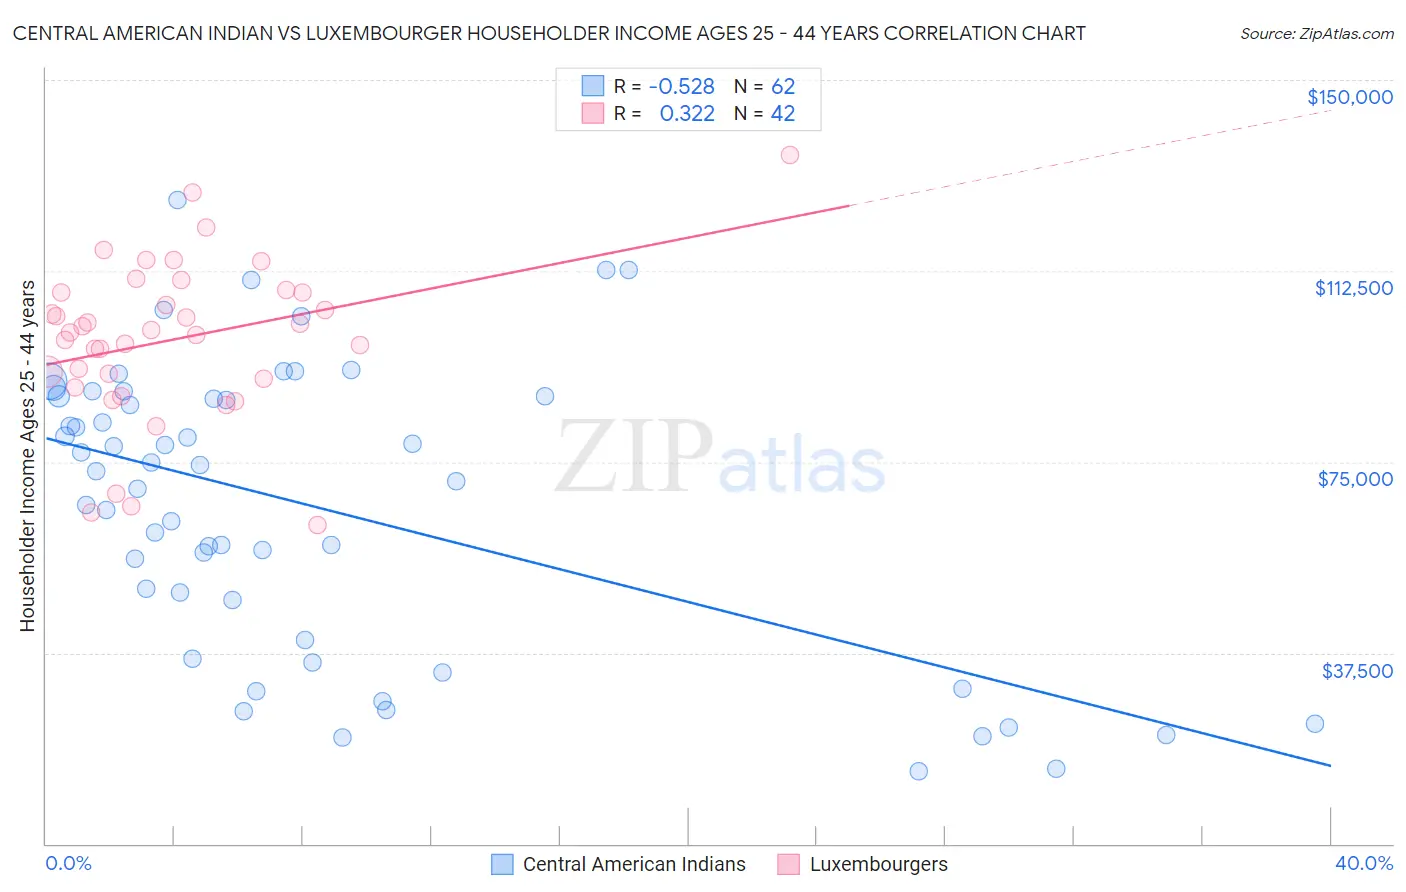 Central American Indian vs Luxembourger Householder Income Ages 25 - 44 years